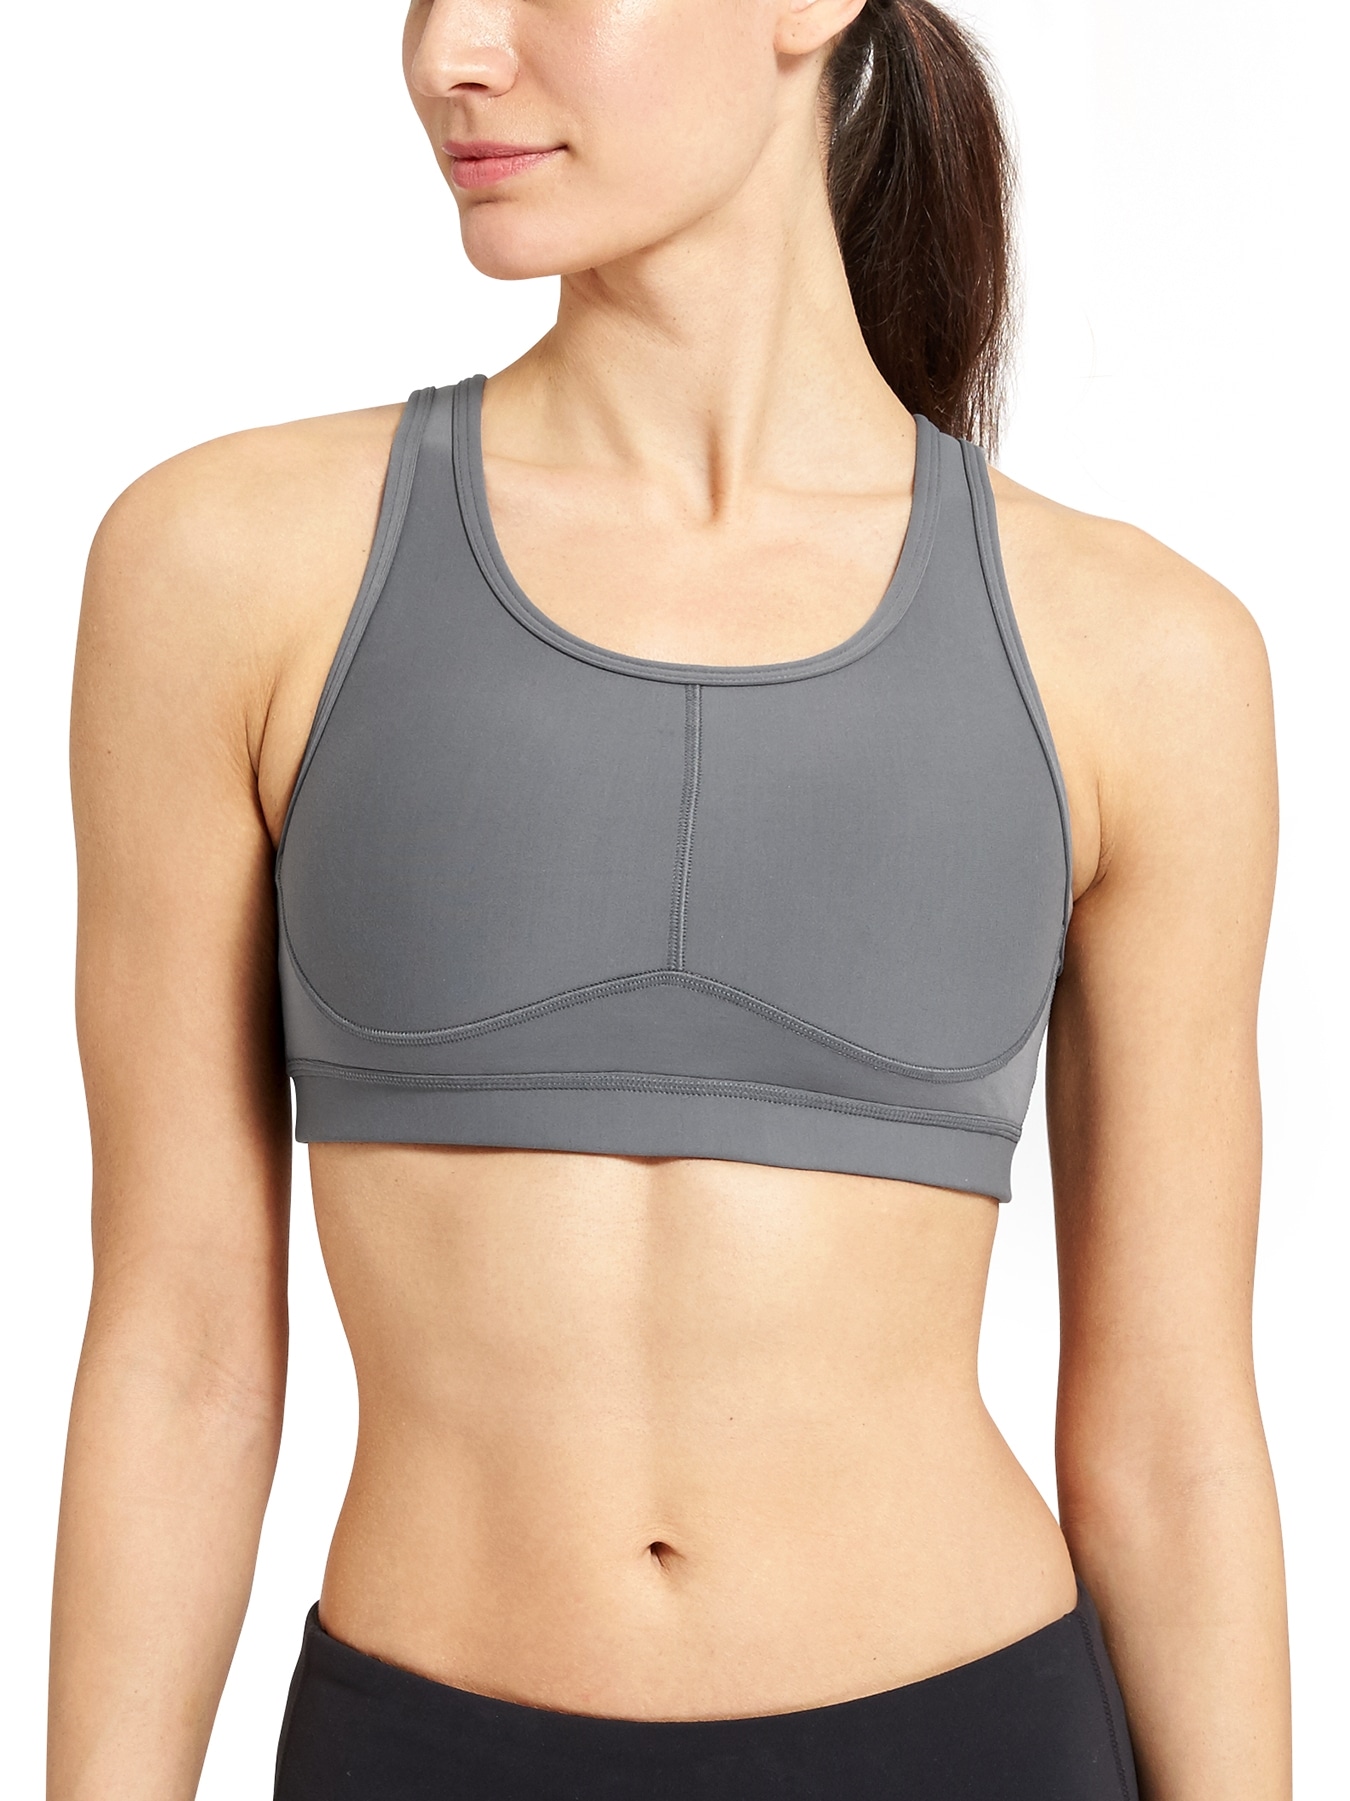 Freely Academy Sports Bra Non-Wired Removable Padding Strappy Back Sof